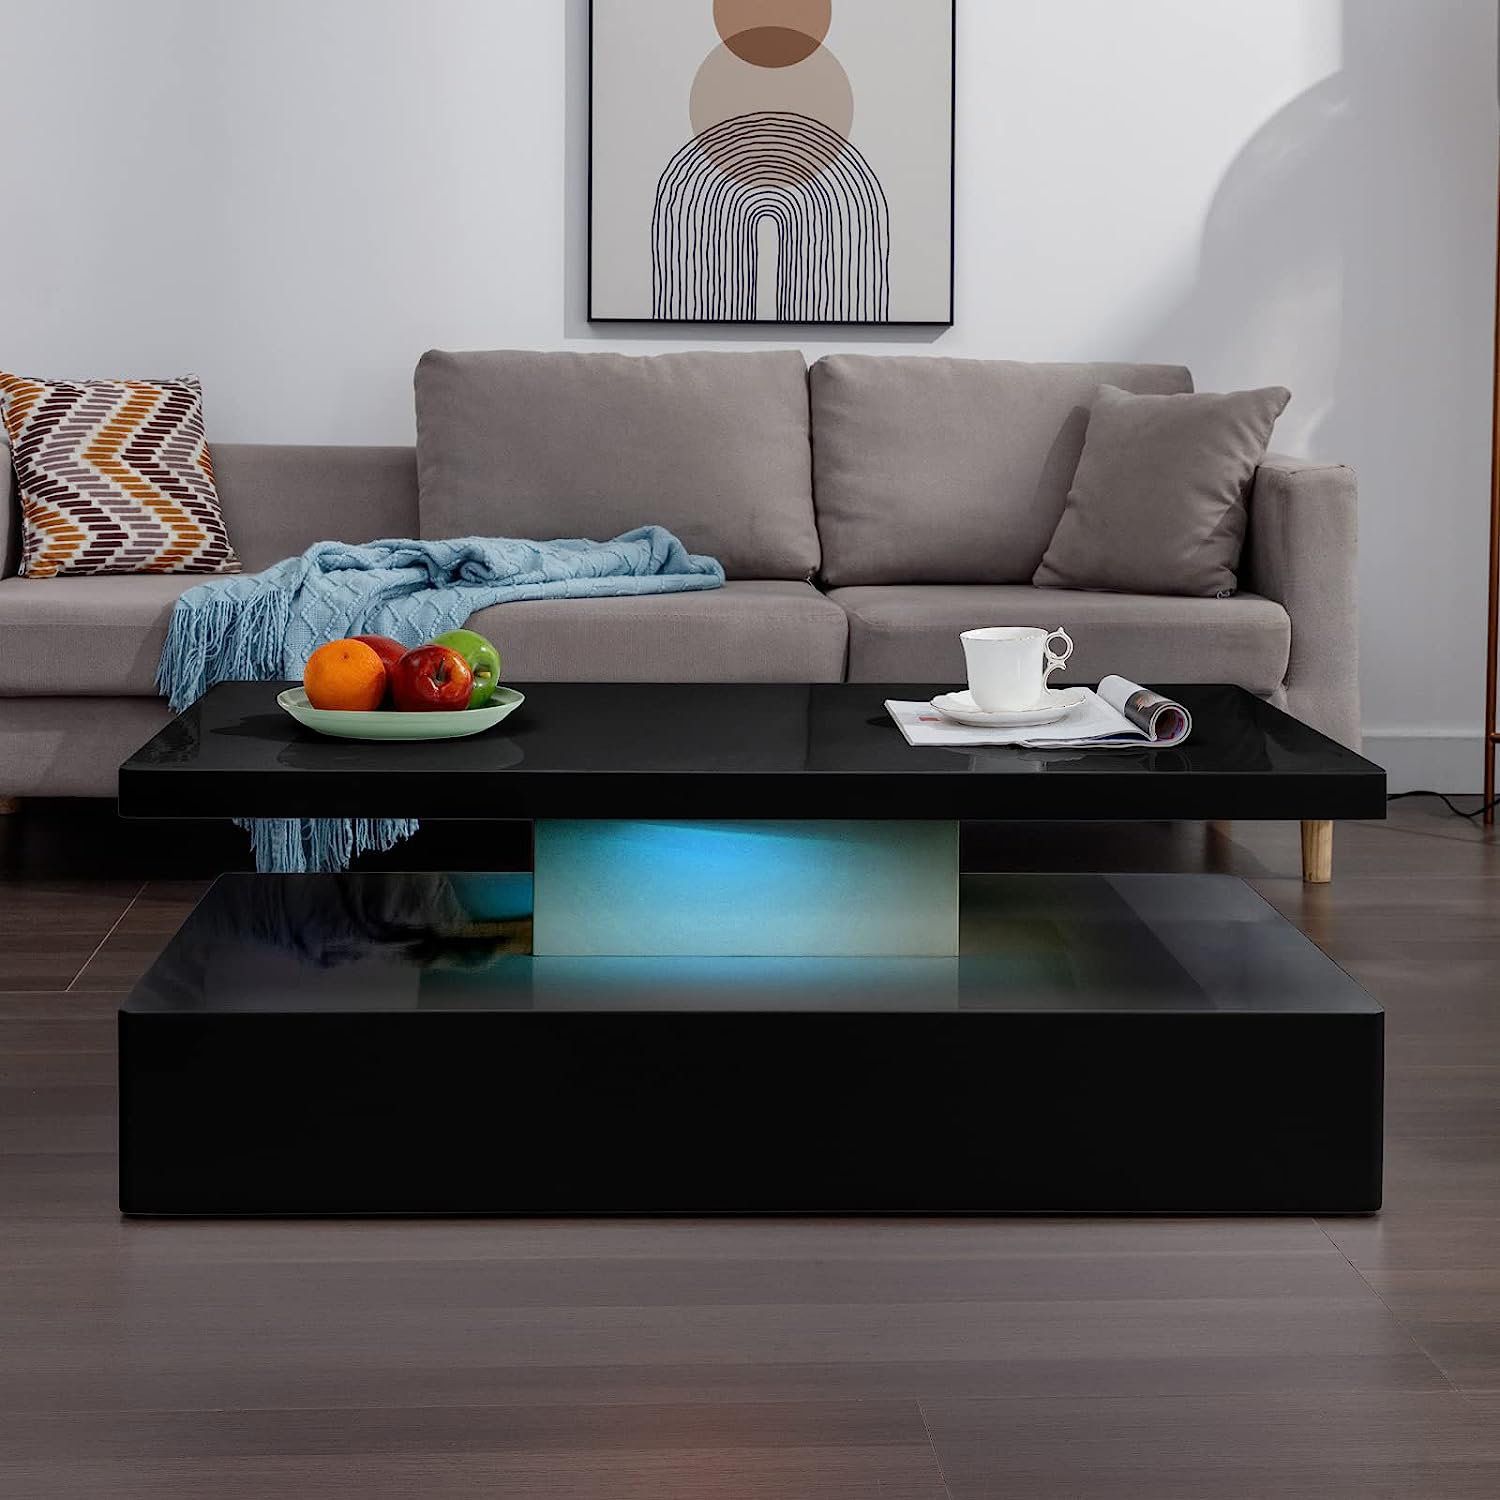 Ivy Bronx Tabu Modern Led Coffee Table With 12 Colors Lights, Living Room Table  Furniture/End Table & Reviews | Wayfair Throughout Rectangular Led Coffee Tables (View 5 of 15)